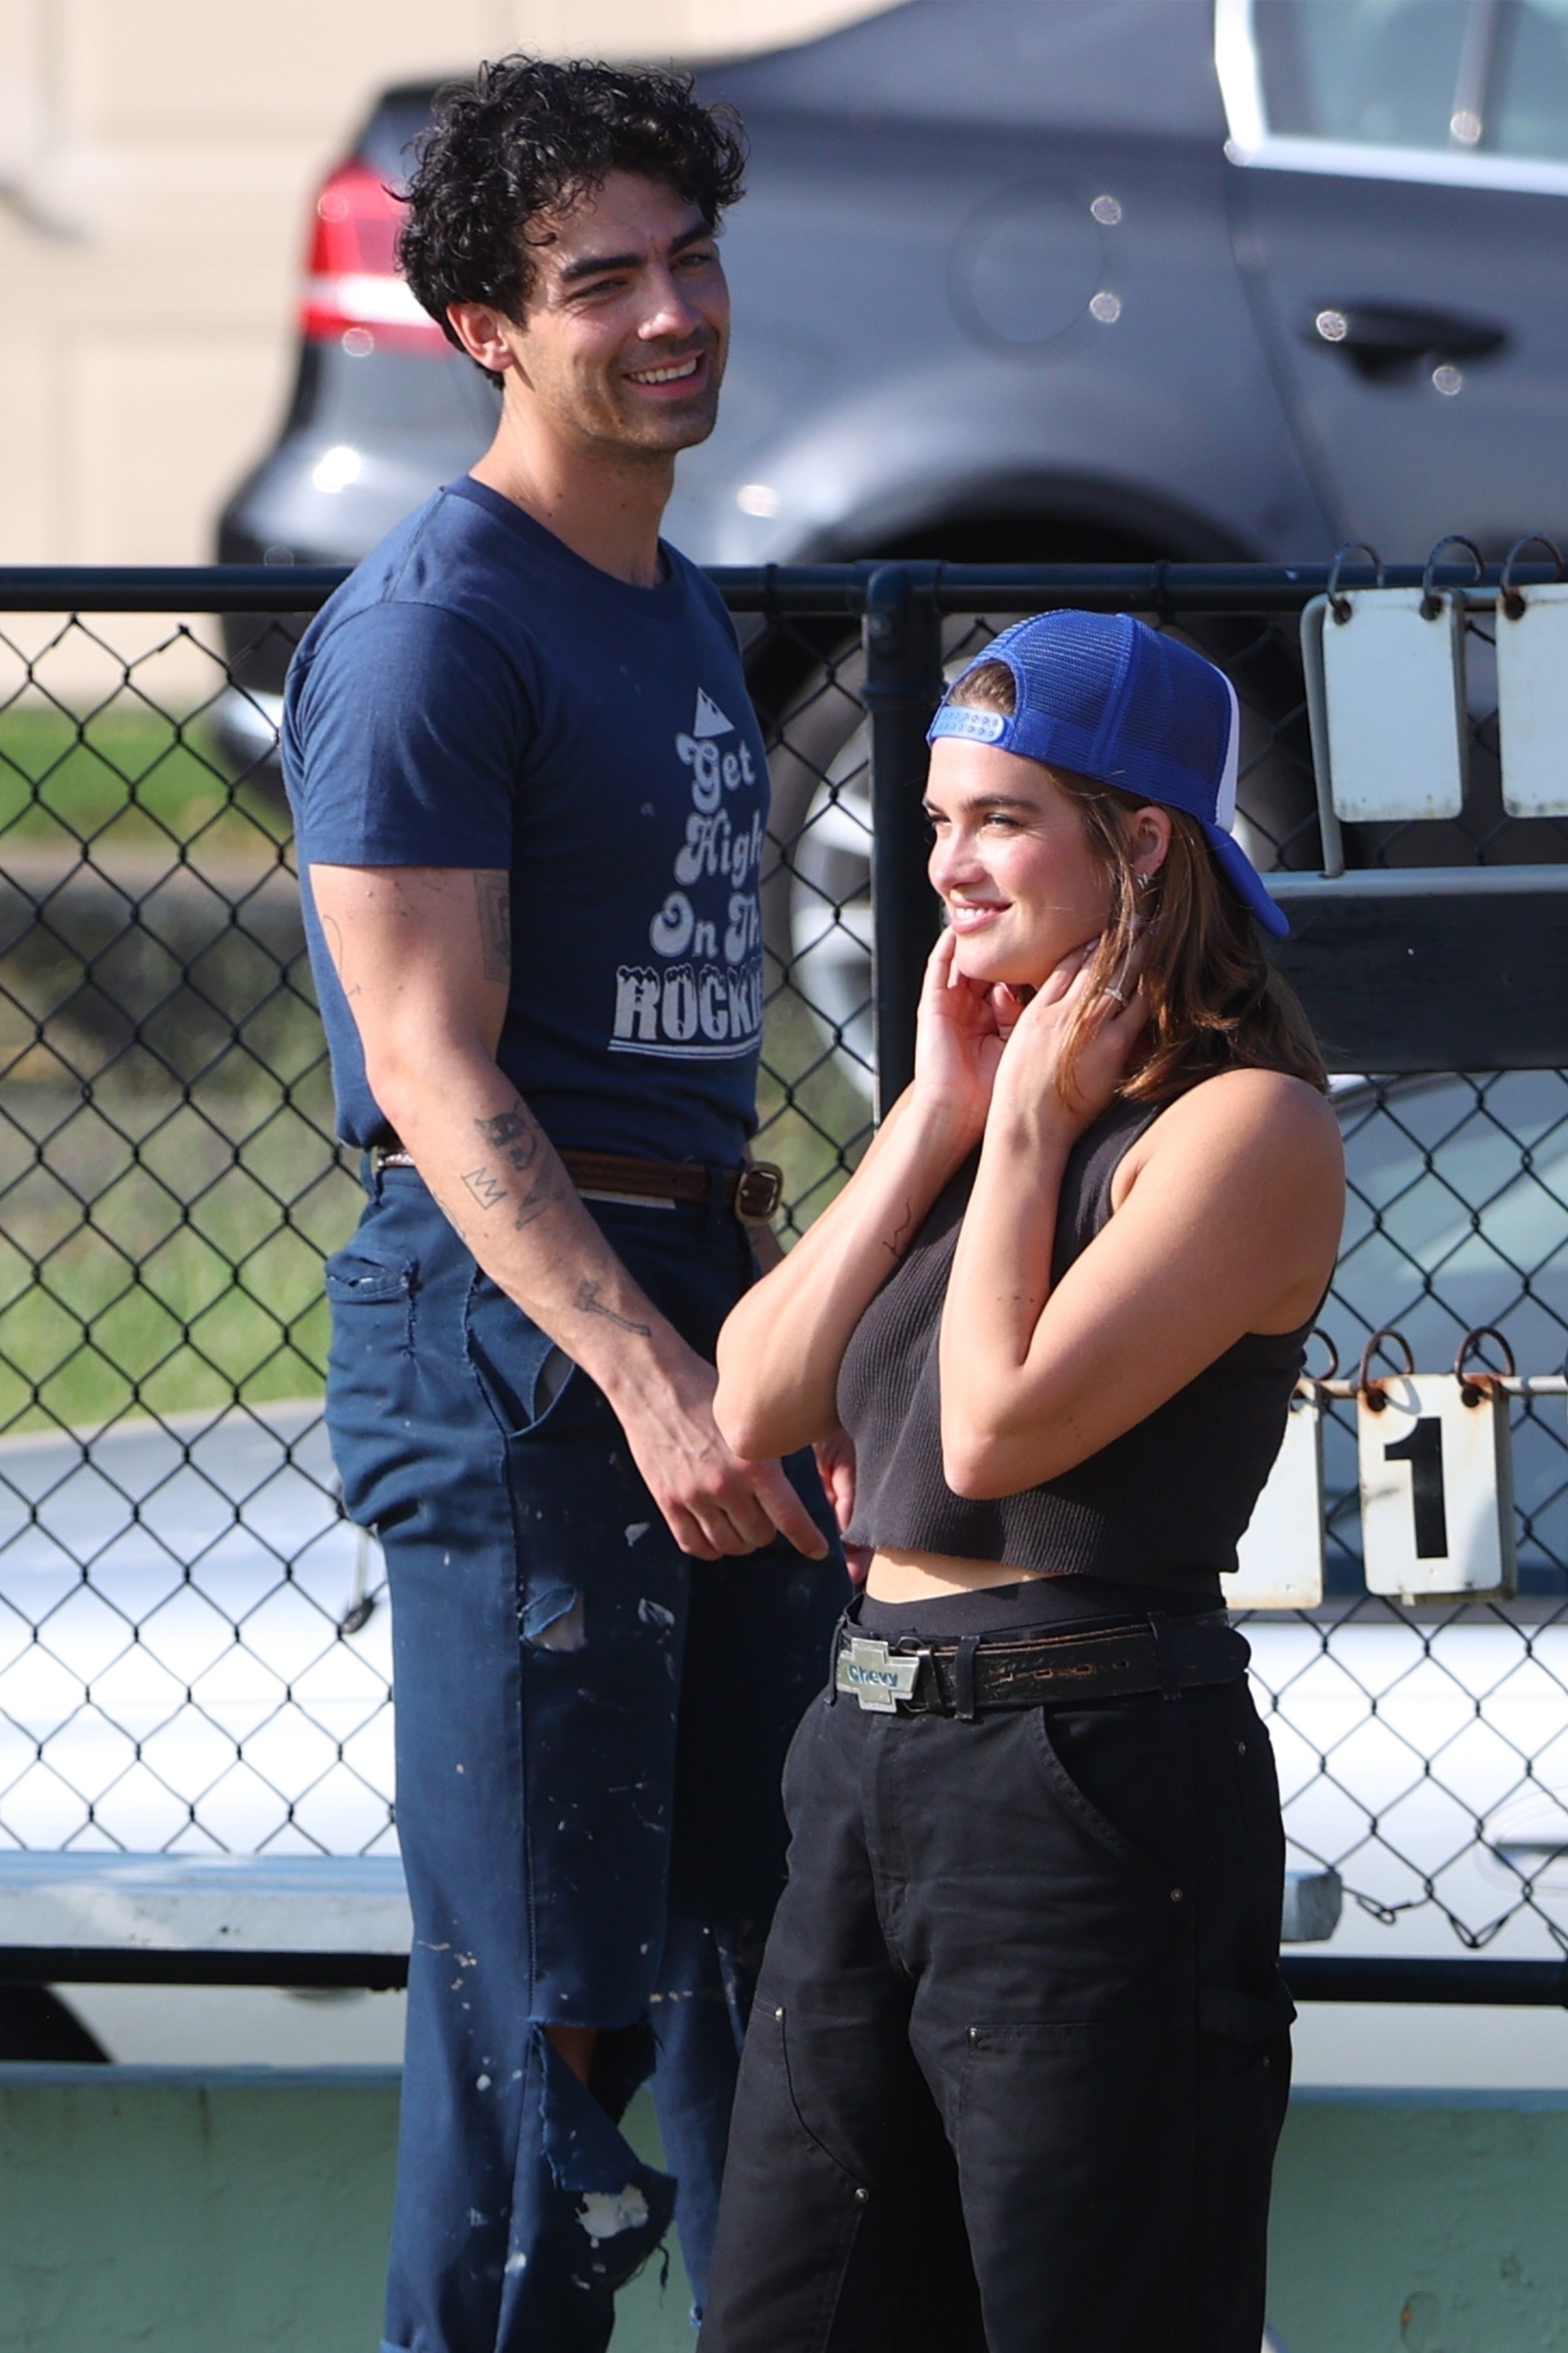 Joe in a casual t-shirt and Stormi in a crop top and high-waisted pants smiling as they hang outside